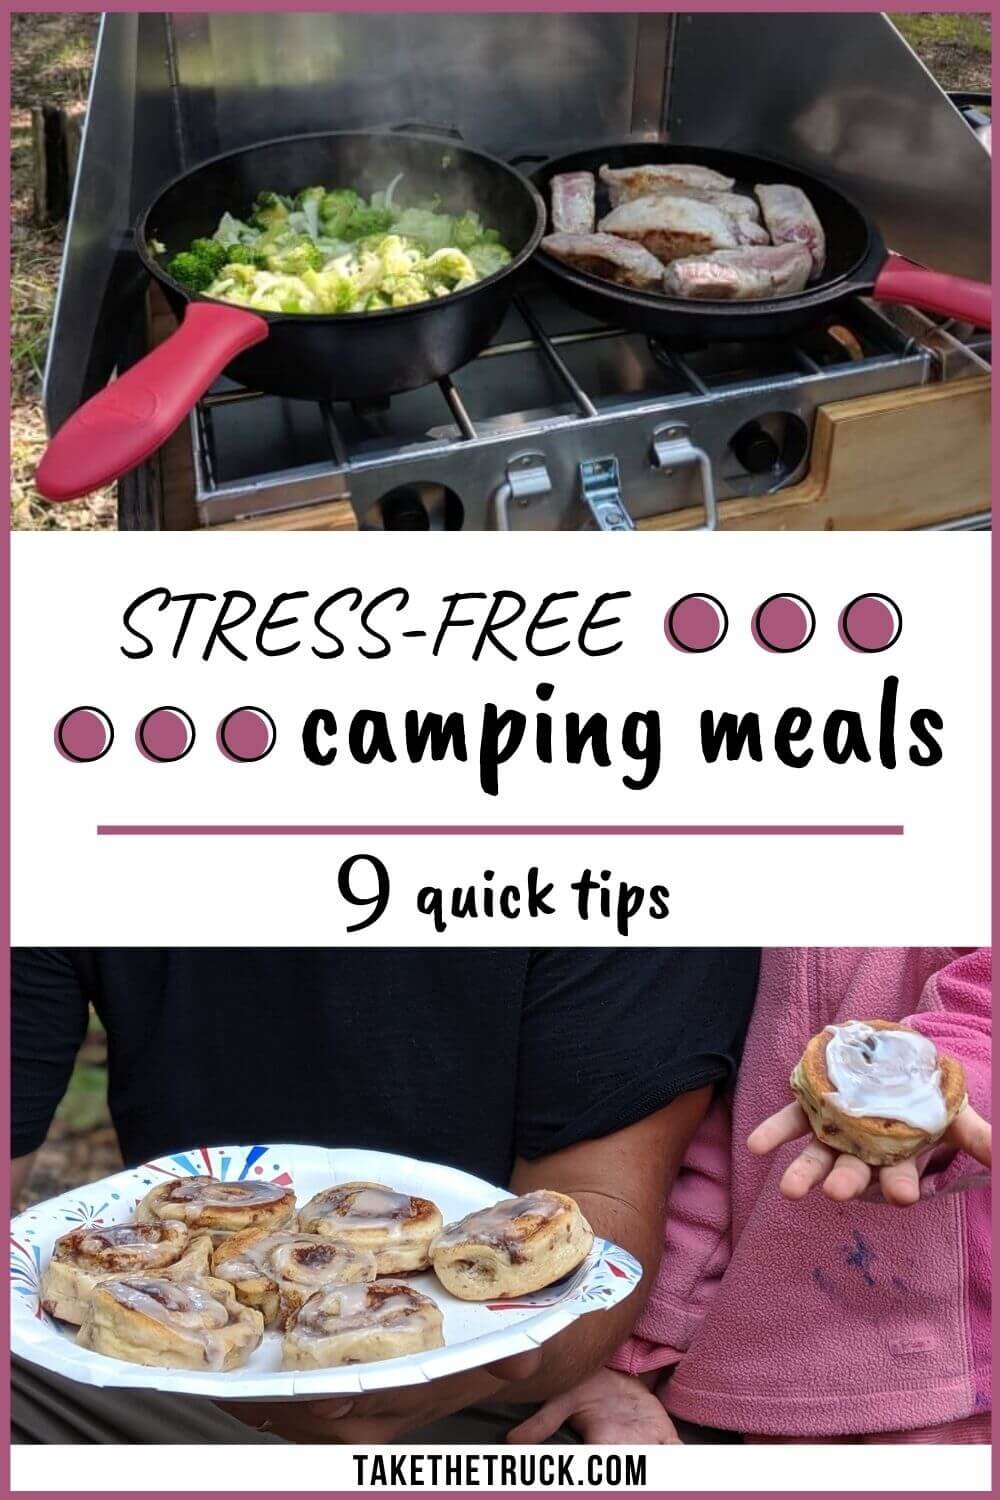 We’ve got 9 tips to get you started on planning and preparing easy camping meals for your next camping trip. During your adventure, you can have stress-free food options ready to eat! 